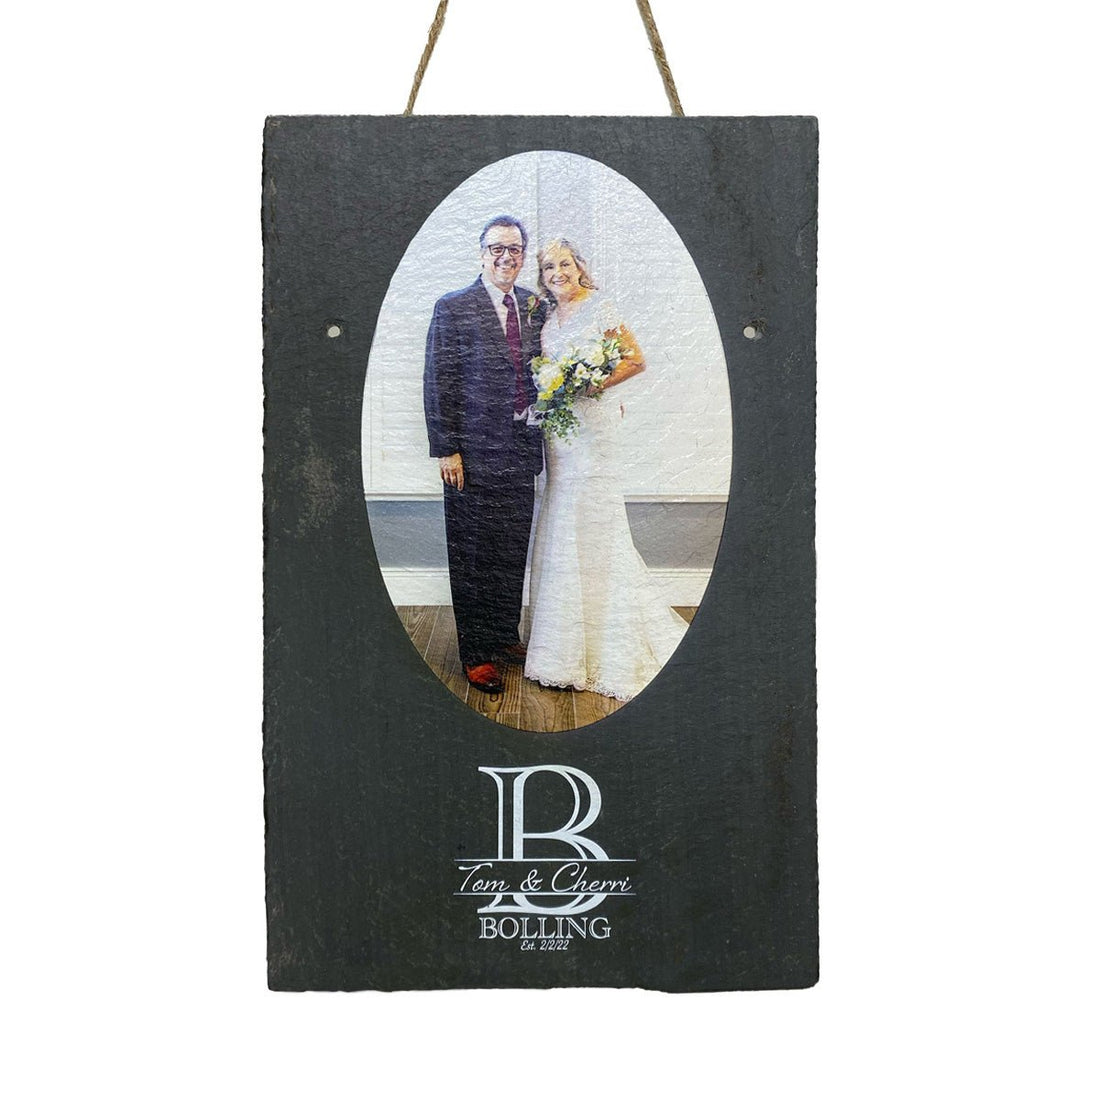 UV Printed Image (Portrait Format) and Text on 9.75"x15.75" Beautiful Charcoal Slate